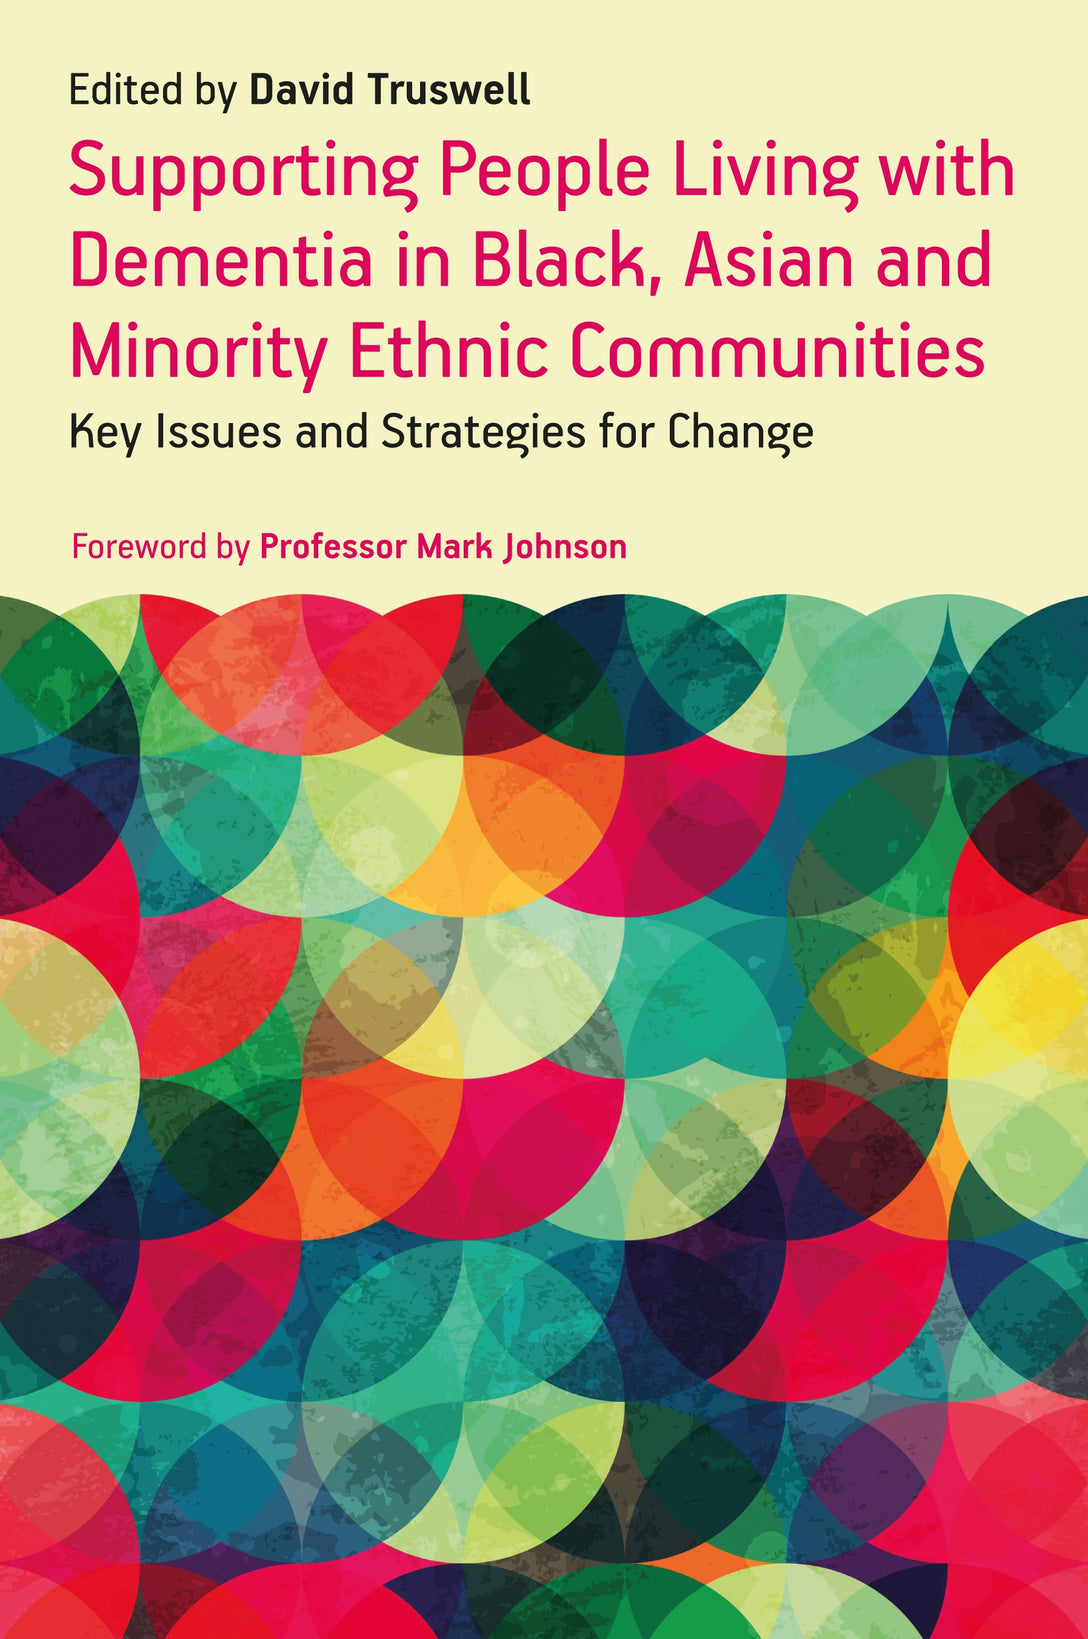 Supporting People Living with Dementia in Black, Asian and Minority Ethnic Communities by David Truswell, Professor Mark Johnson, No Author Listed